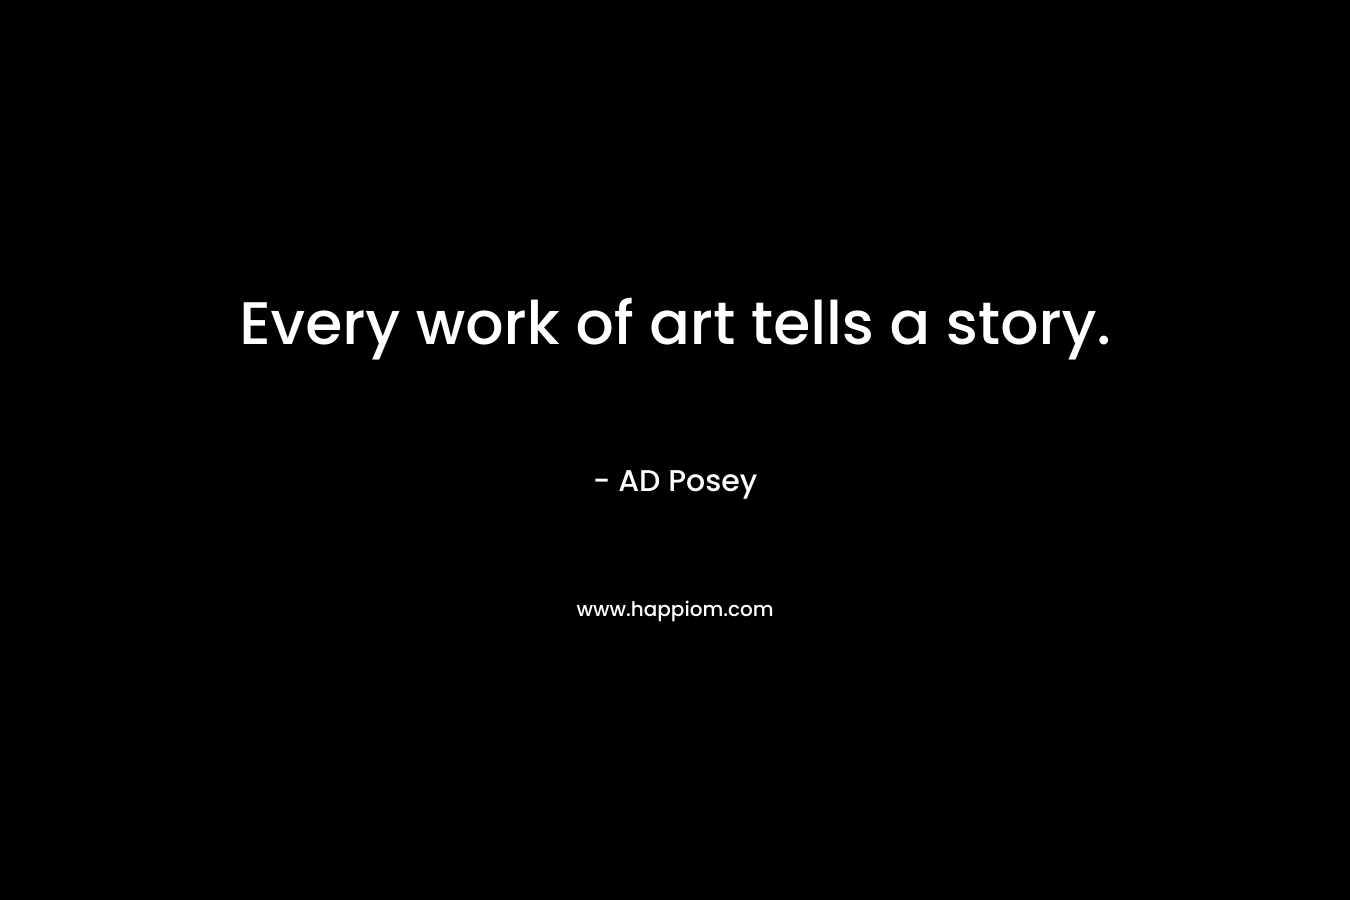 Every work of art tells a story.